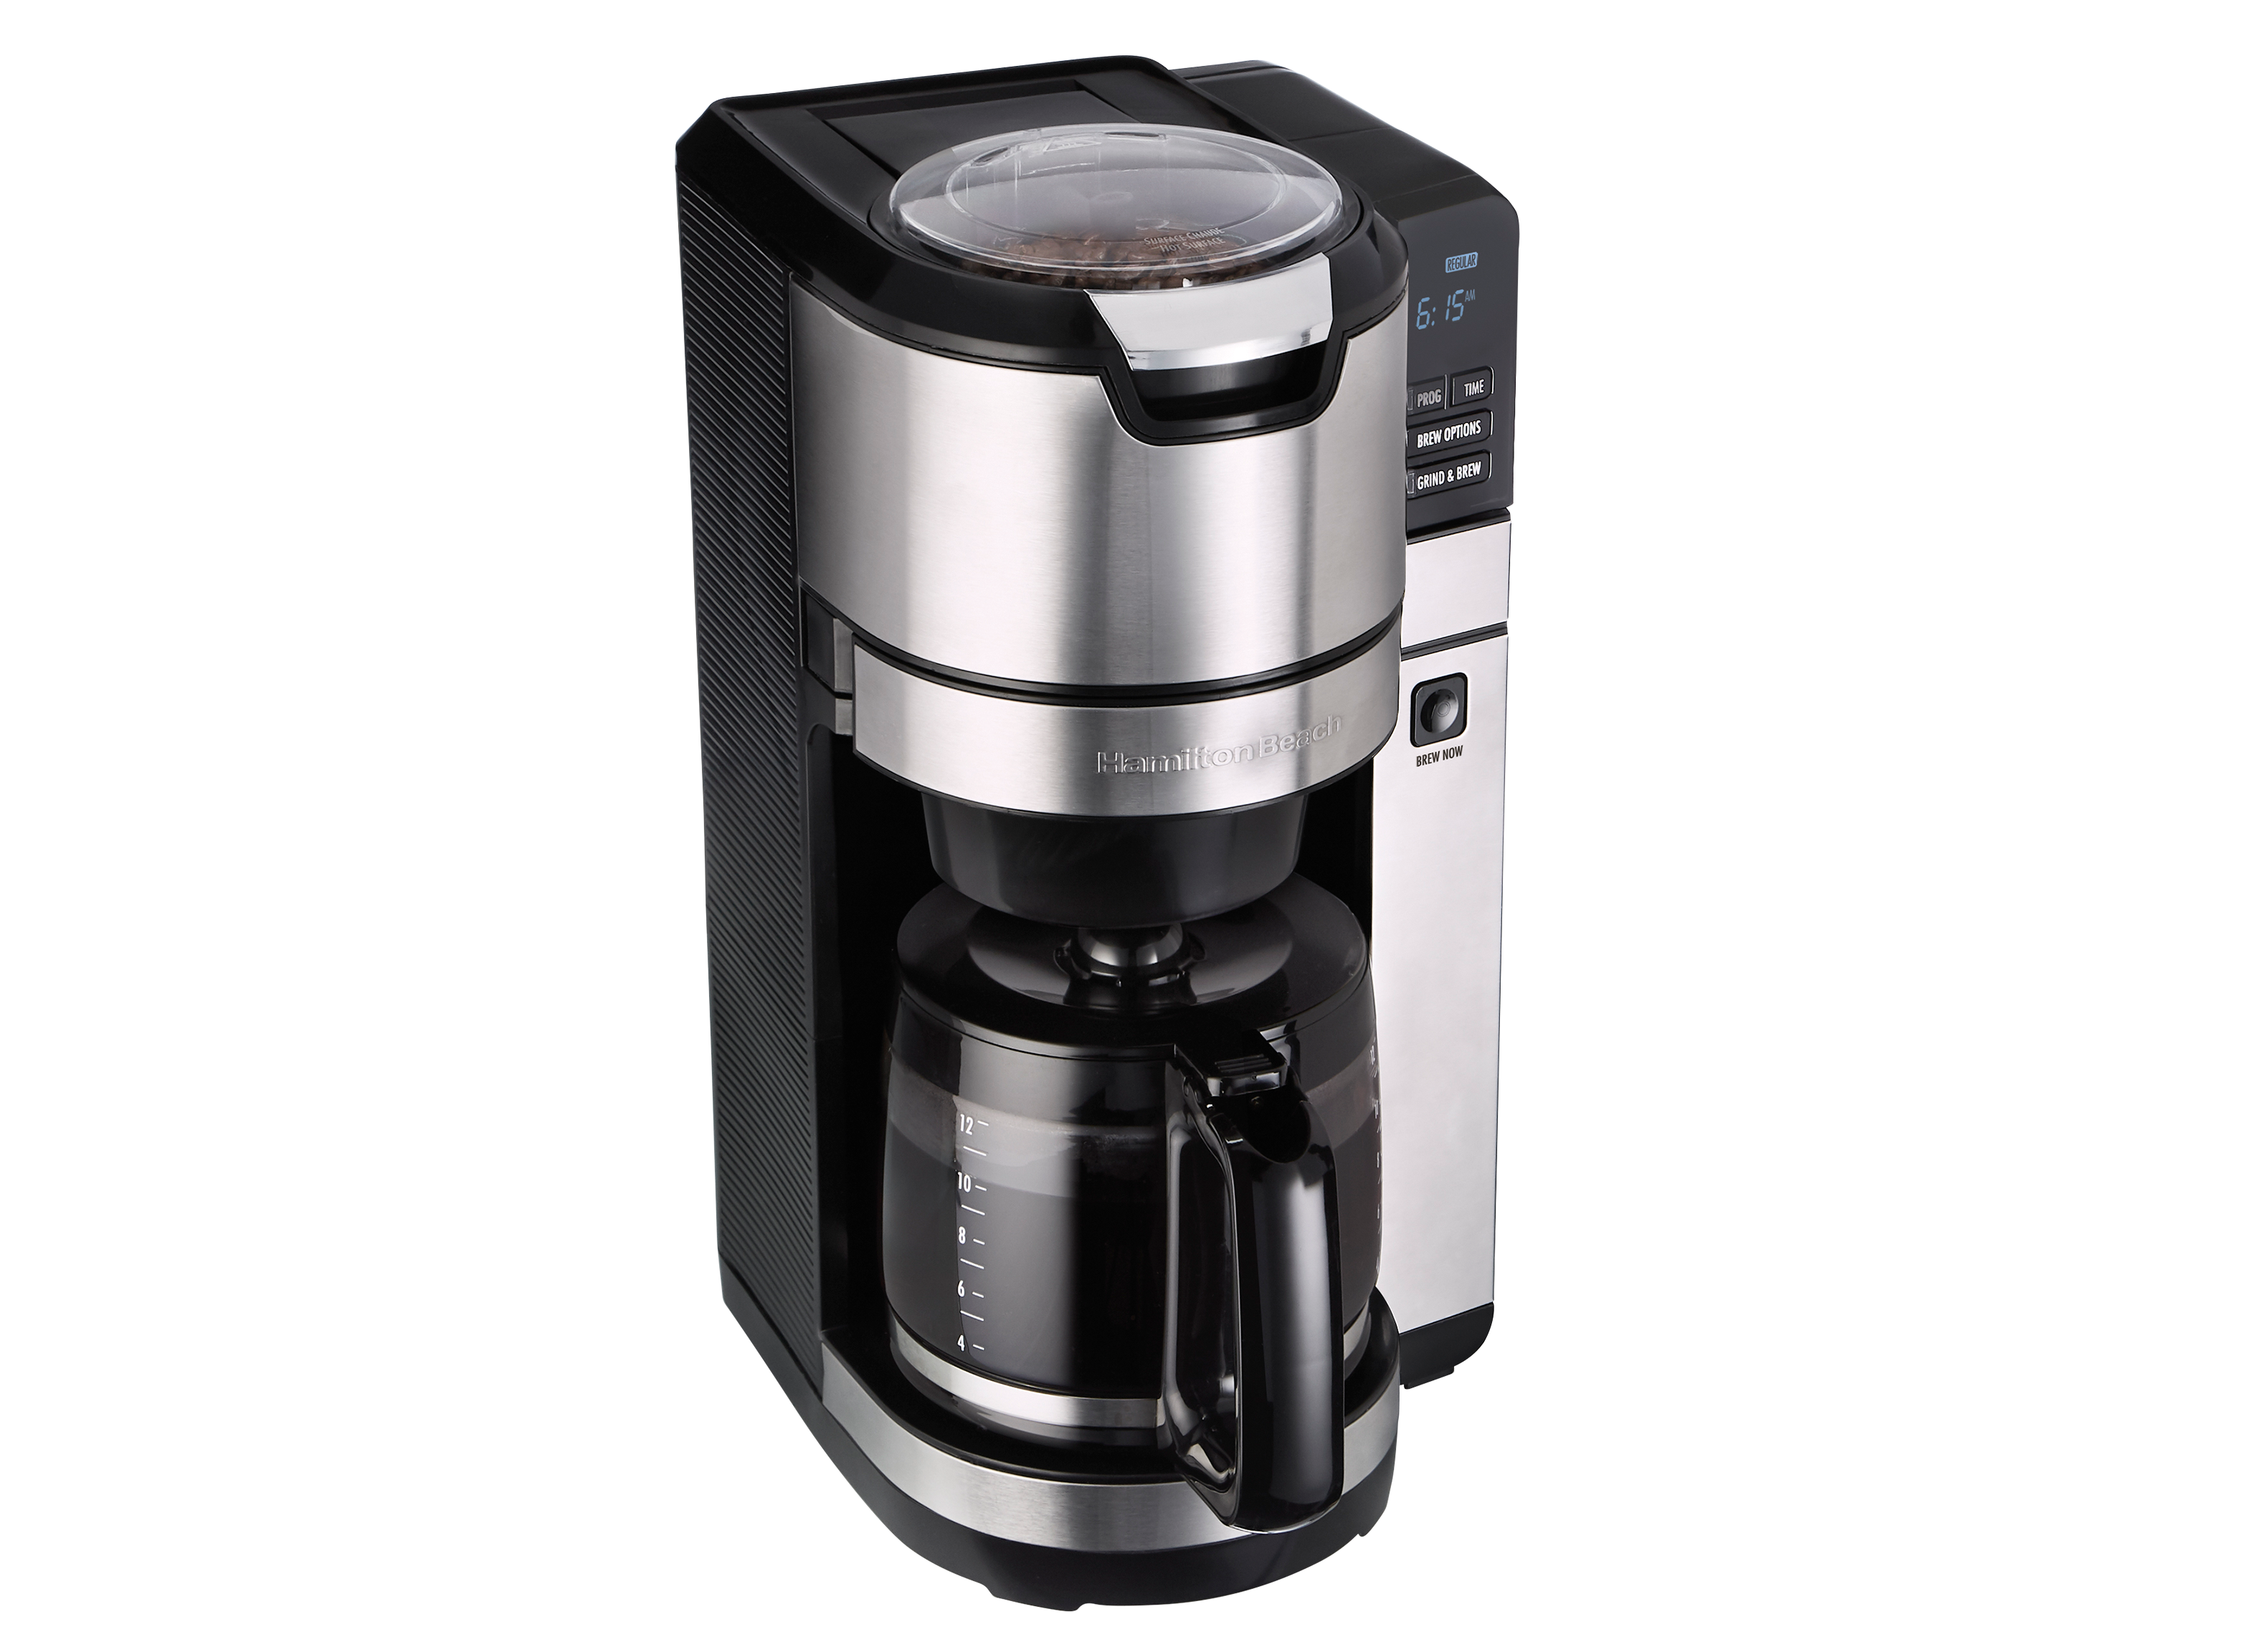 https://crdms.images.consumerreports.org/prod/products/cr/models/404045-drip-coffee-makers-with-carafe-hamilton-beach-programmable-grind-and-brew-45505-10021155.png